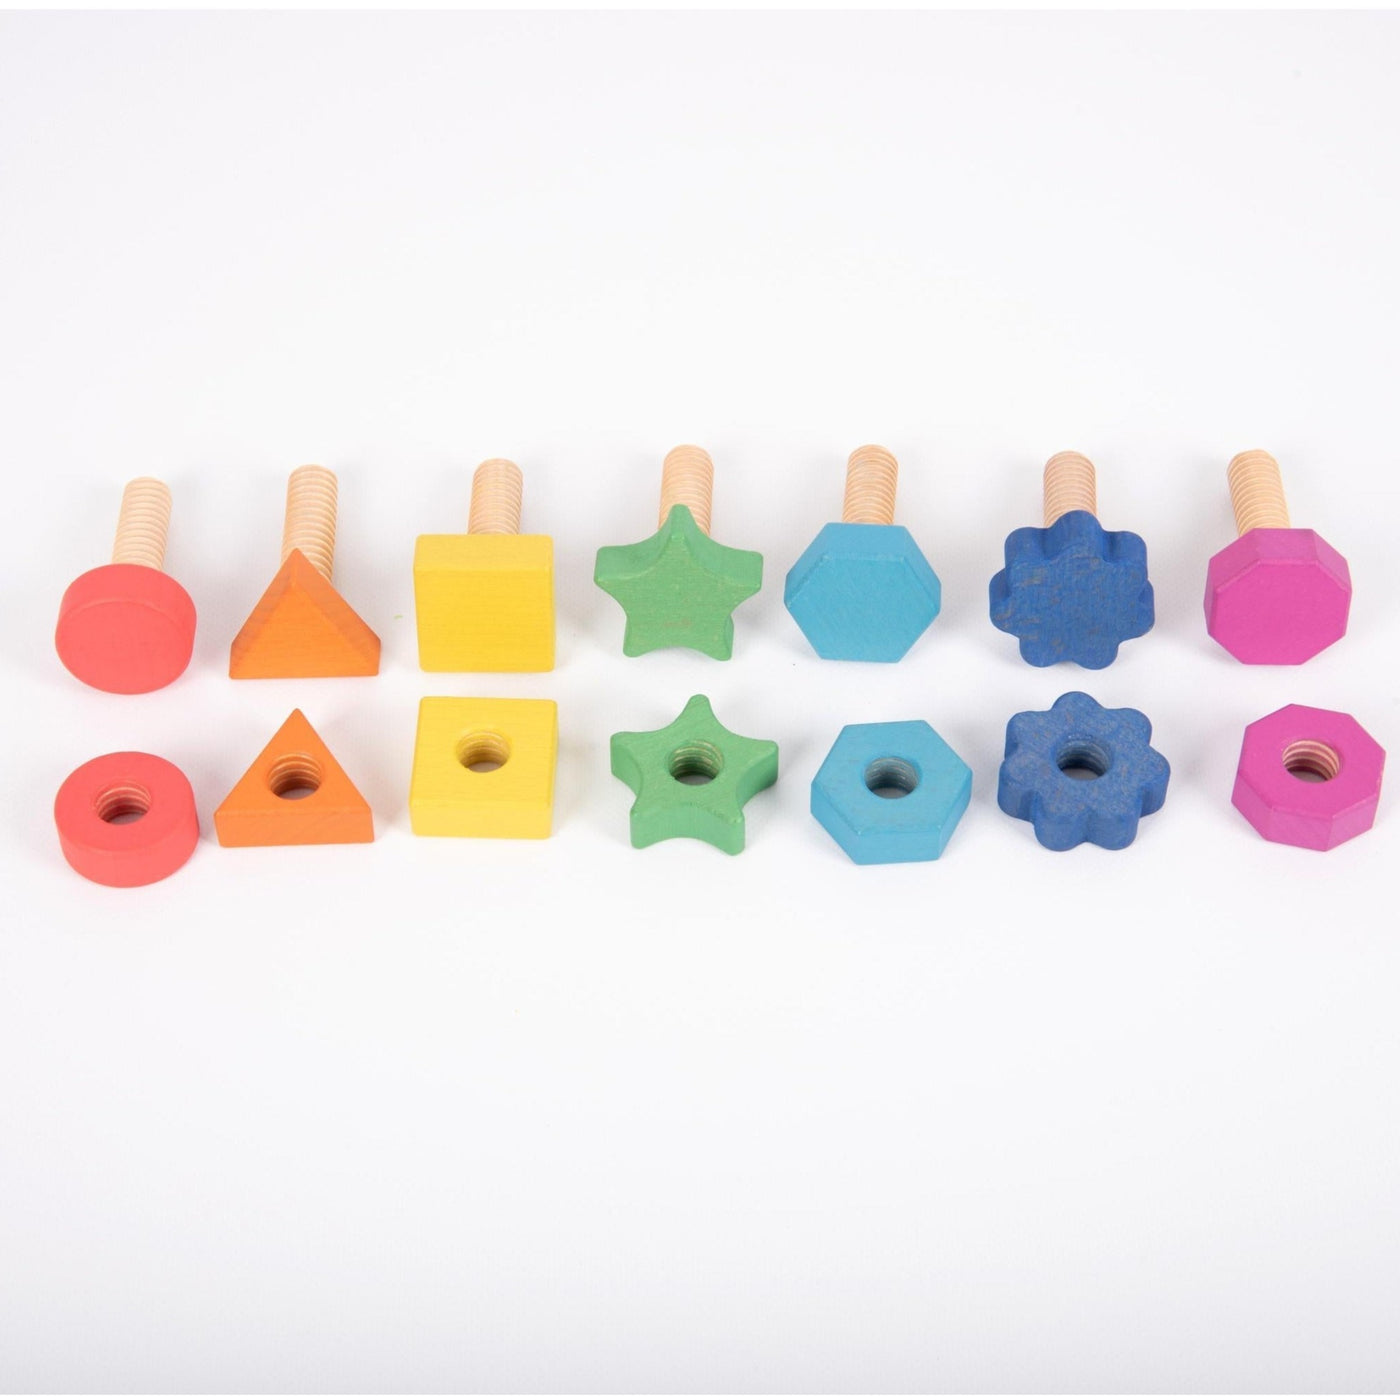 TickiT Rainbow Wooden Nuts & Bolts - Pack of 7